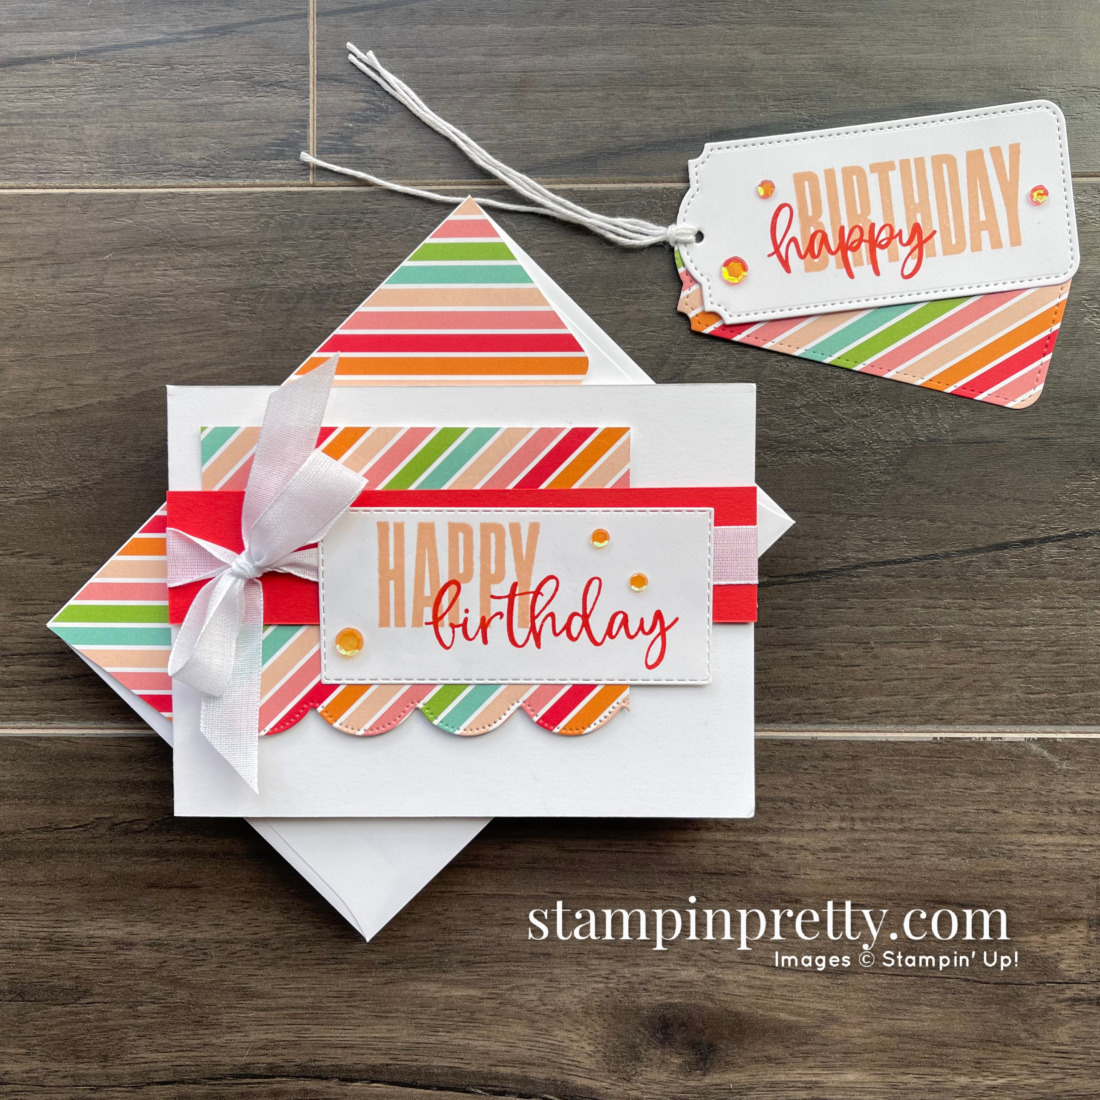 NEW! Stampin' Up! Biggest Wish Happy Birthday Card & Tag